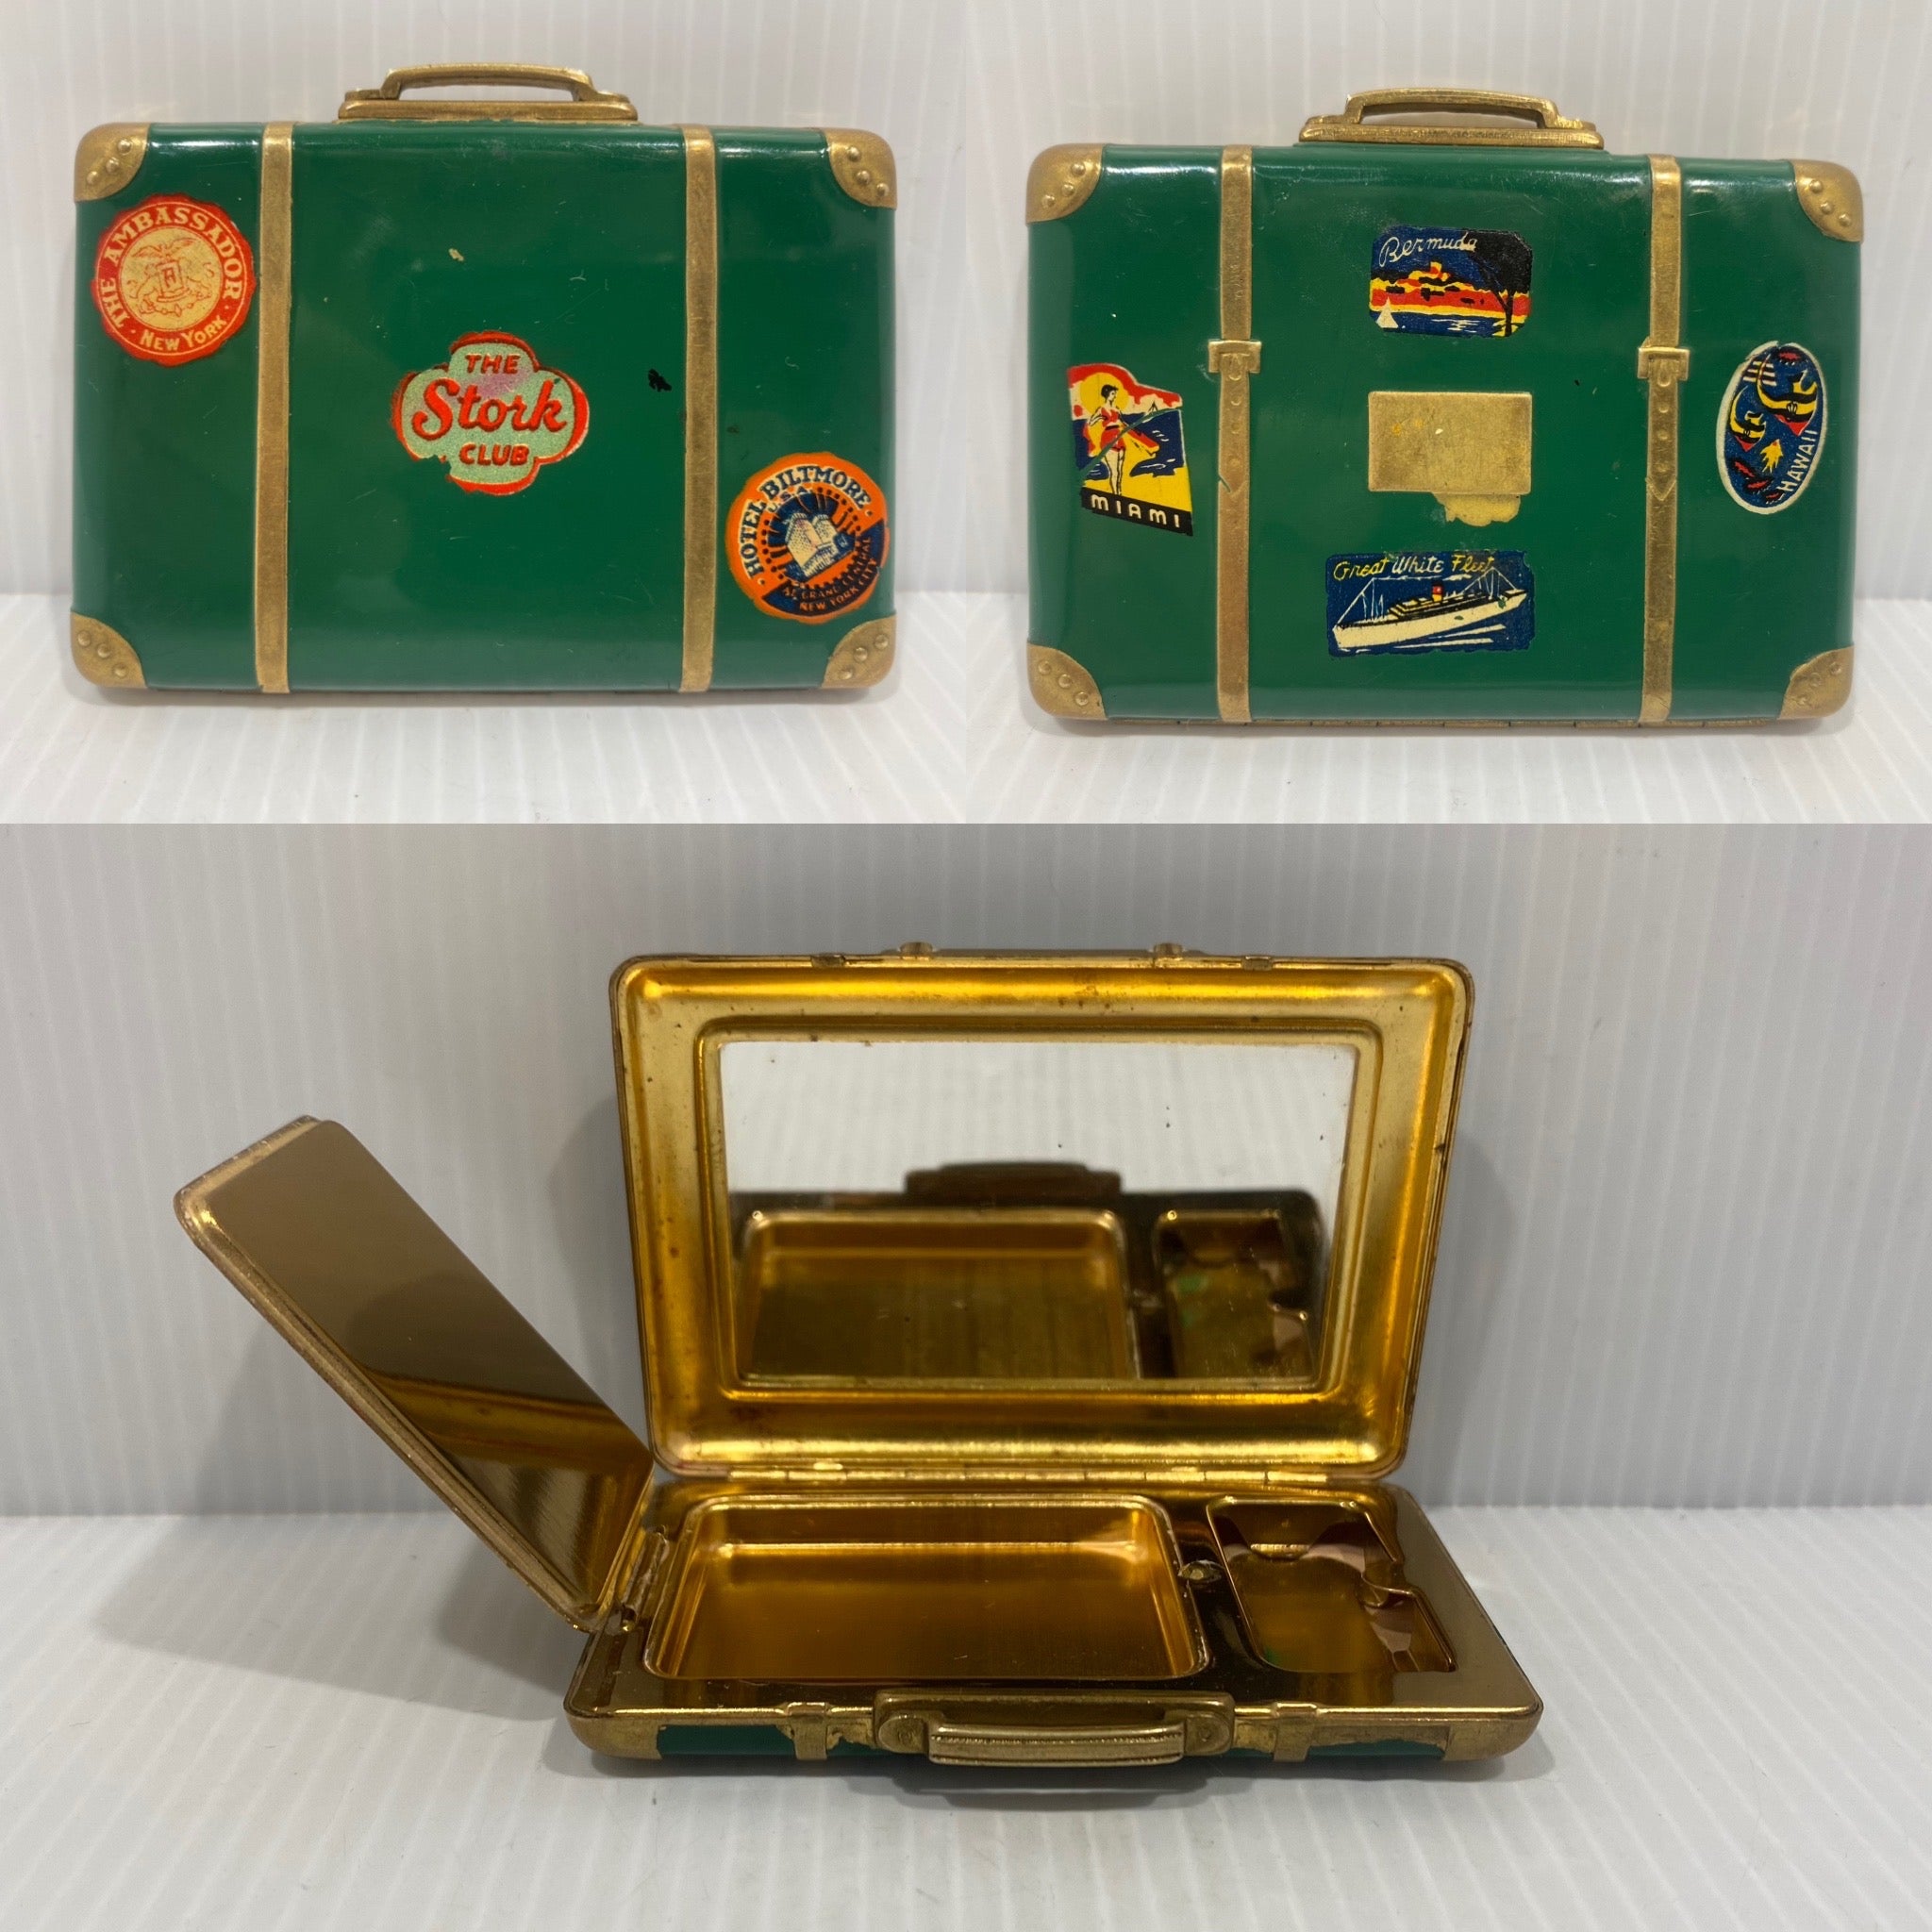 Very rare and sweet Bon Voyage vintage suitcase compact by KIGU 1956.